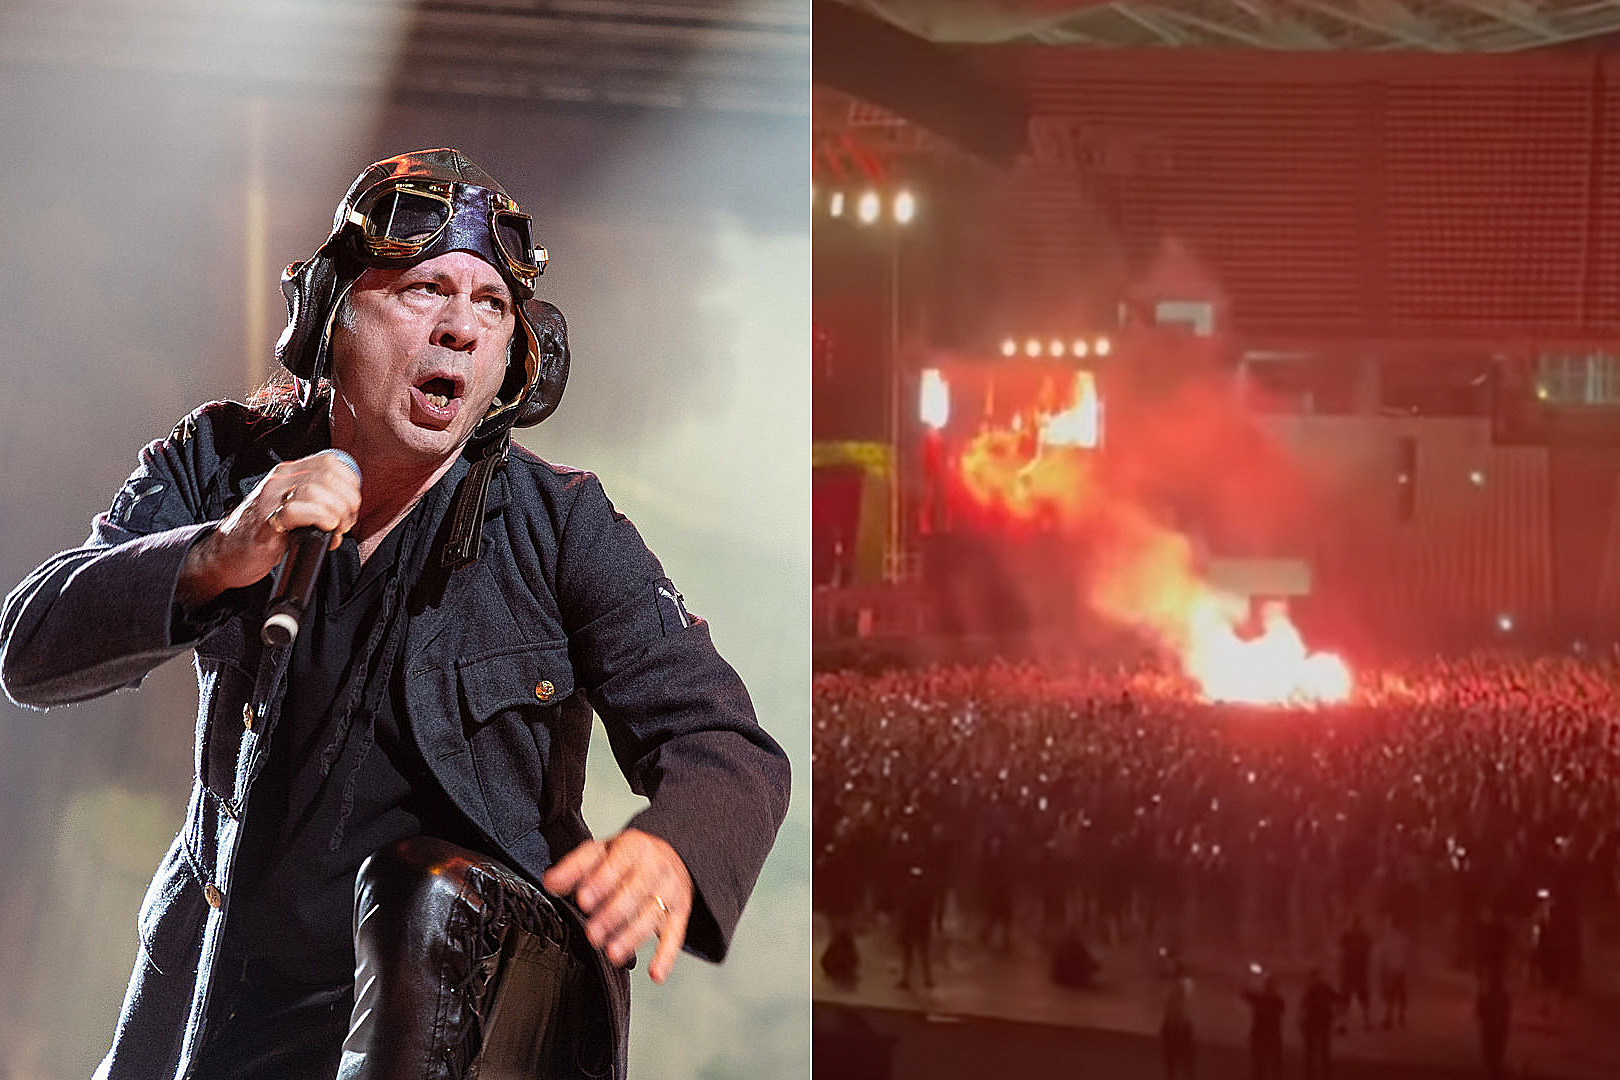 Dickinson Blasts Fan Who Lit a Flare in Crowd at Iron Maiden Show